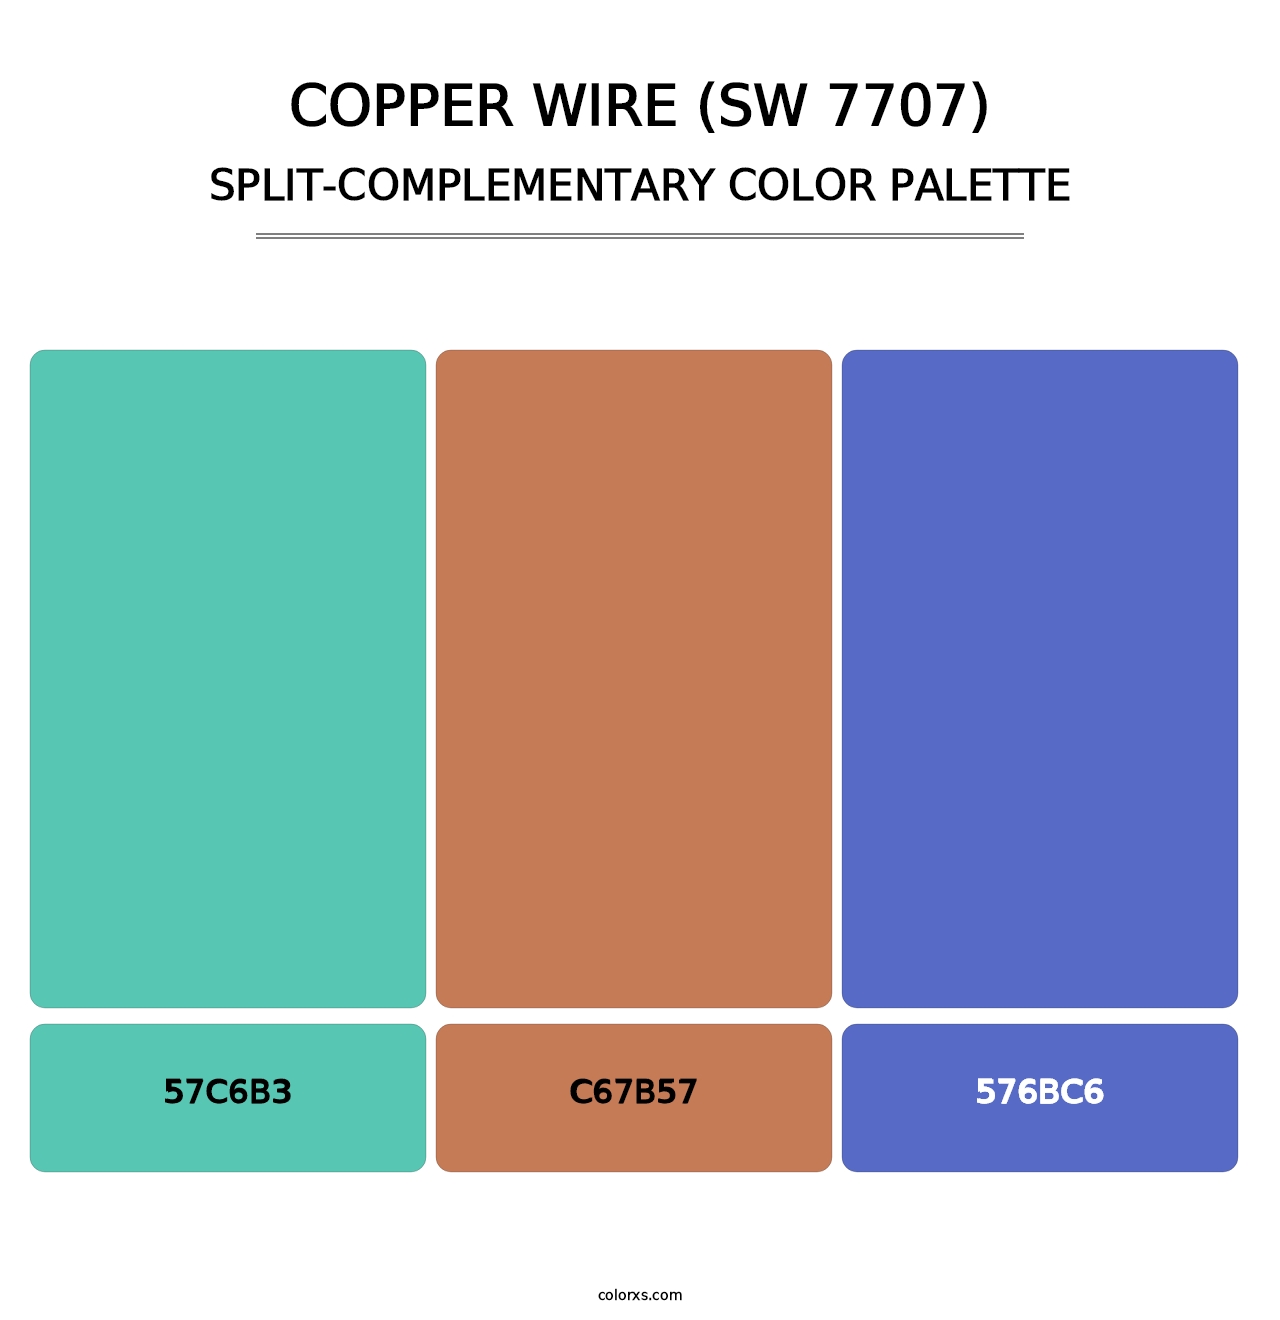 Copper Wire (SW 7707) - Split-Complementary Color Palette